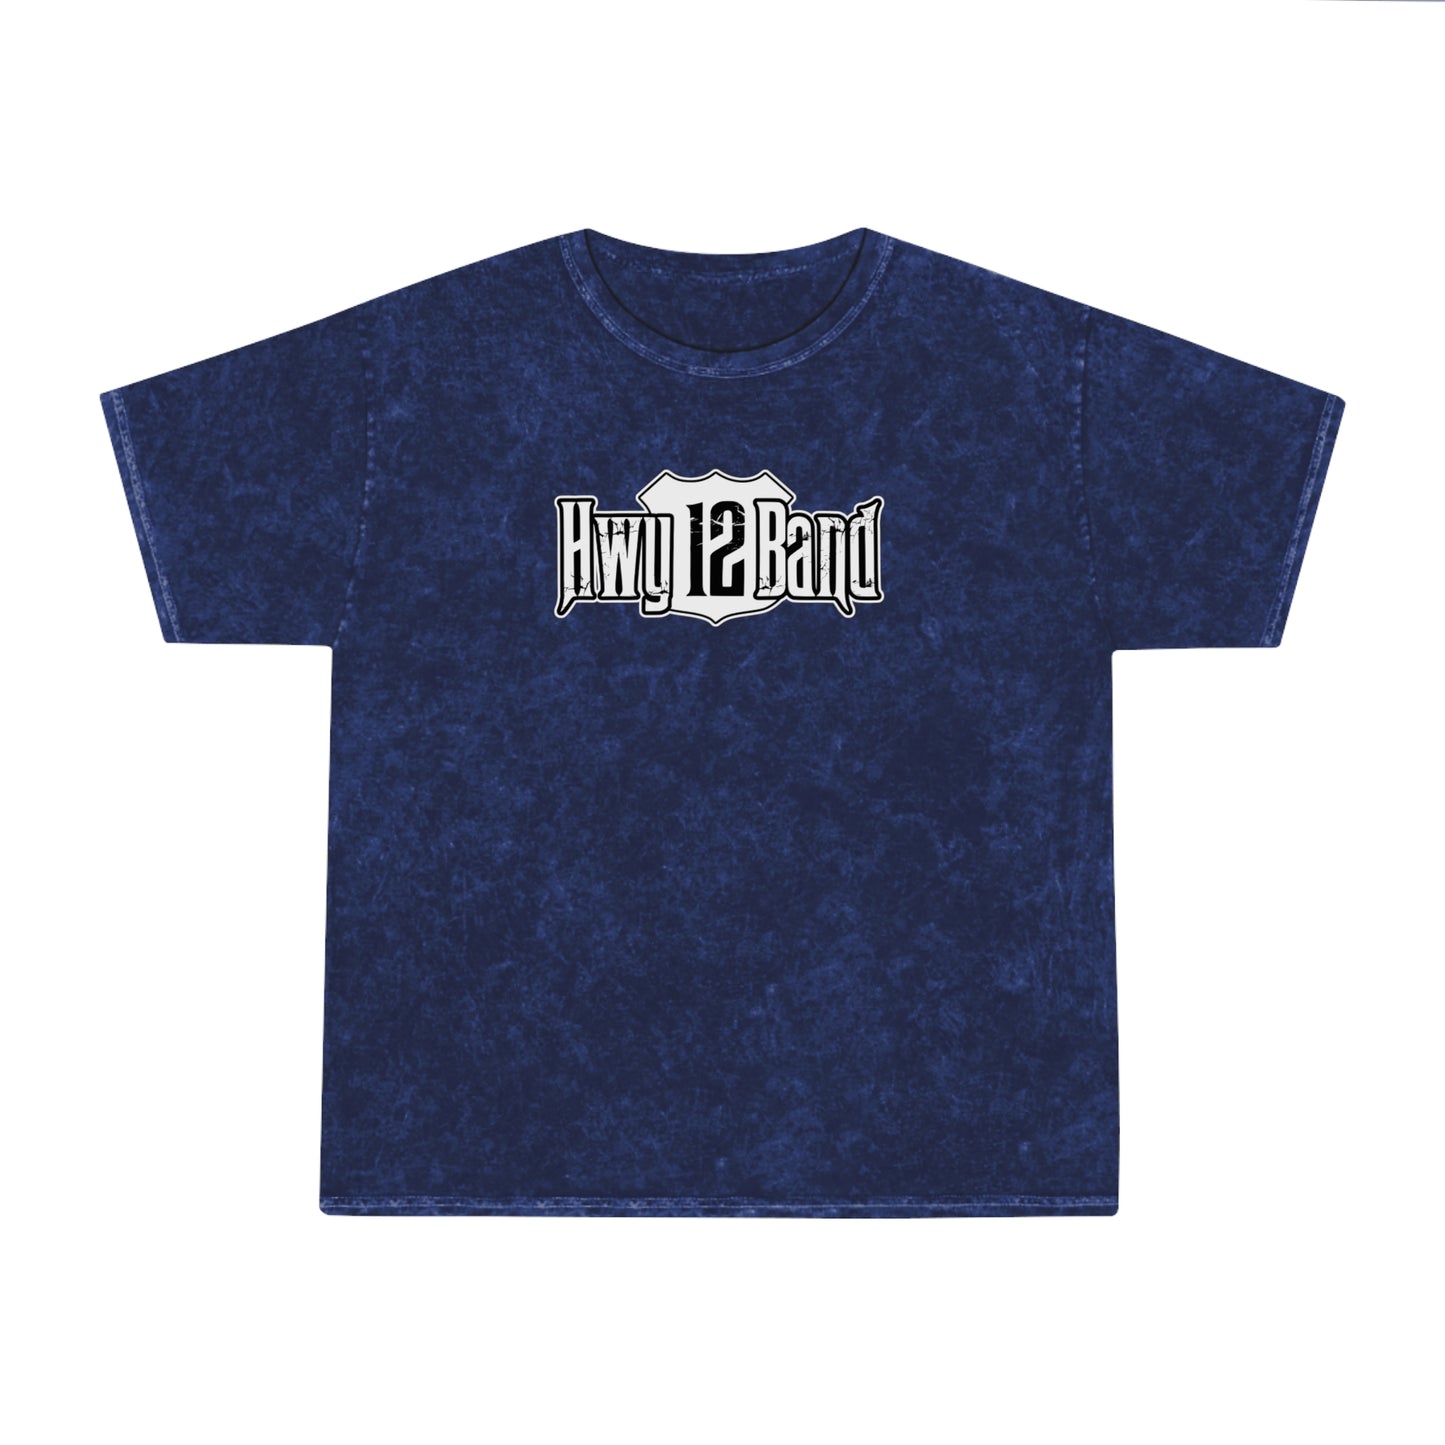 Hwy 12 Band Unisex Mineral Wash T-Shirt